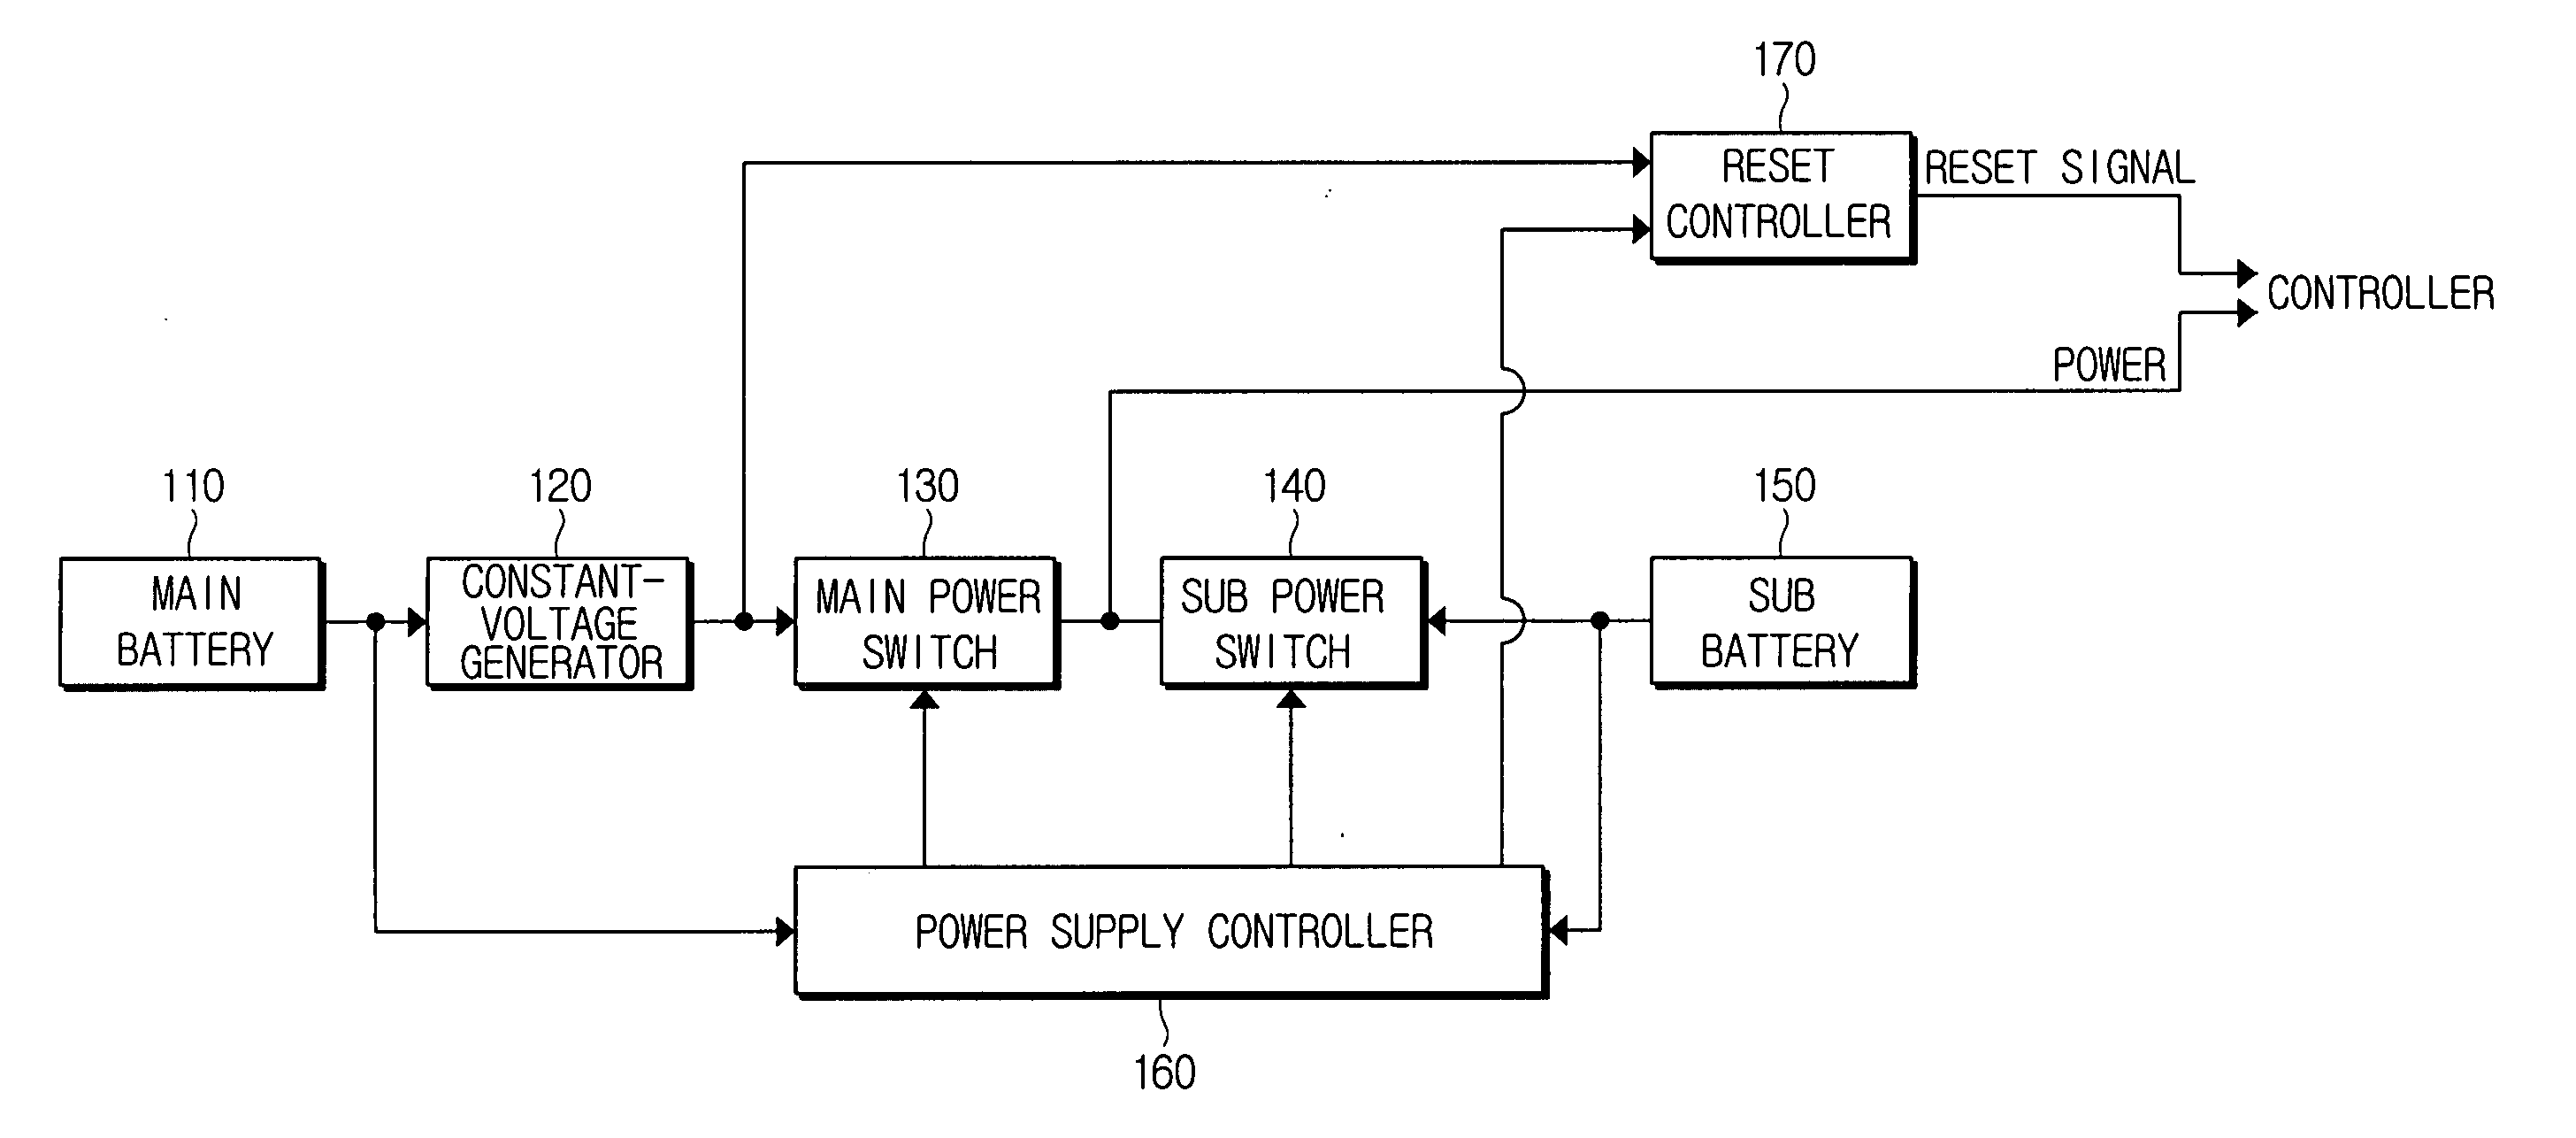 Apparatus for supplying power to controller